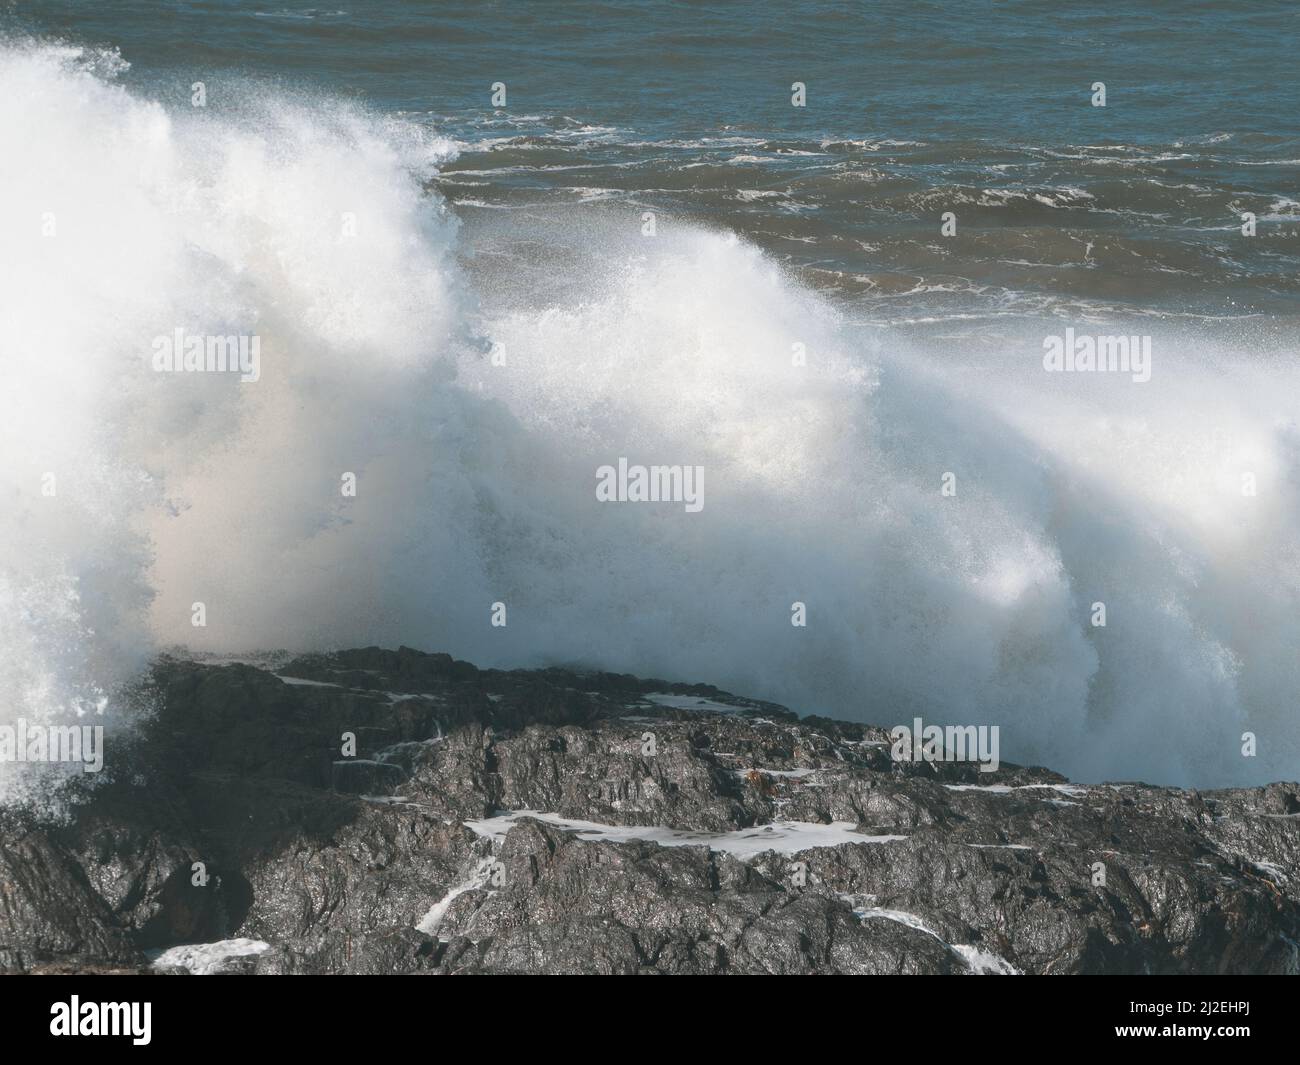 White waves, A wild sea wave crashing and smashing over rocks at the headland, powerful force of nature on display, Pacific Ocean, NSW, Australia Stock Photo